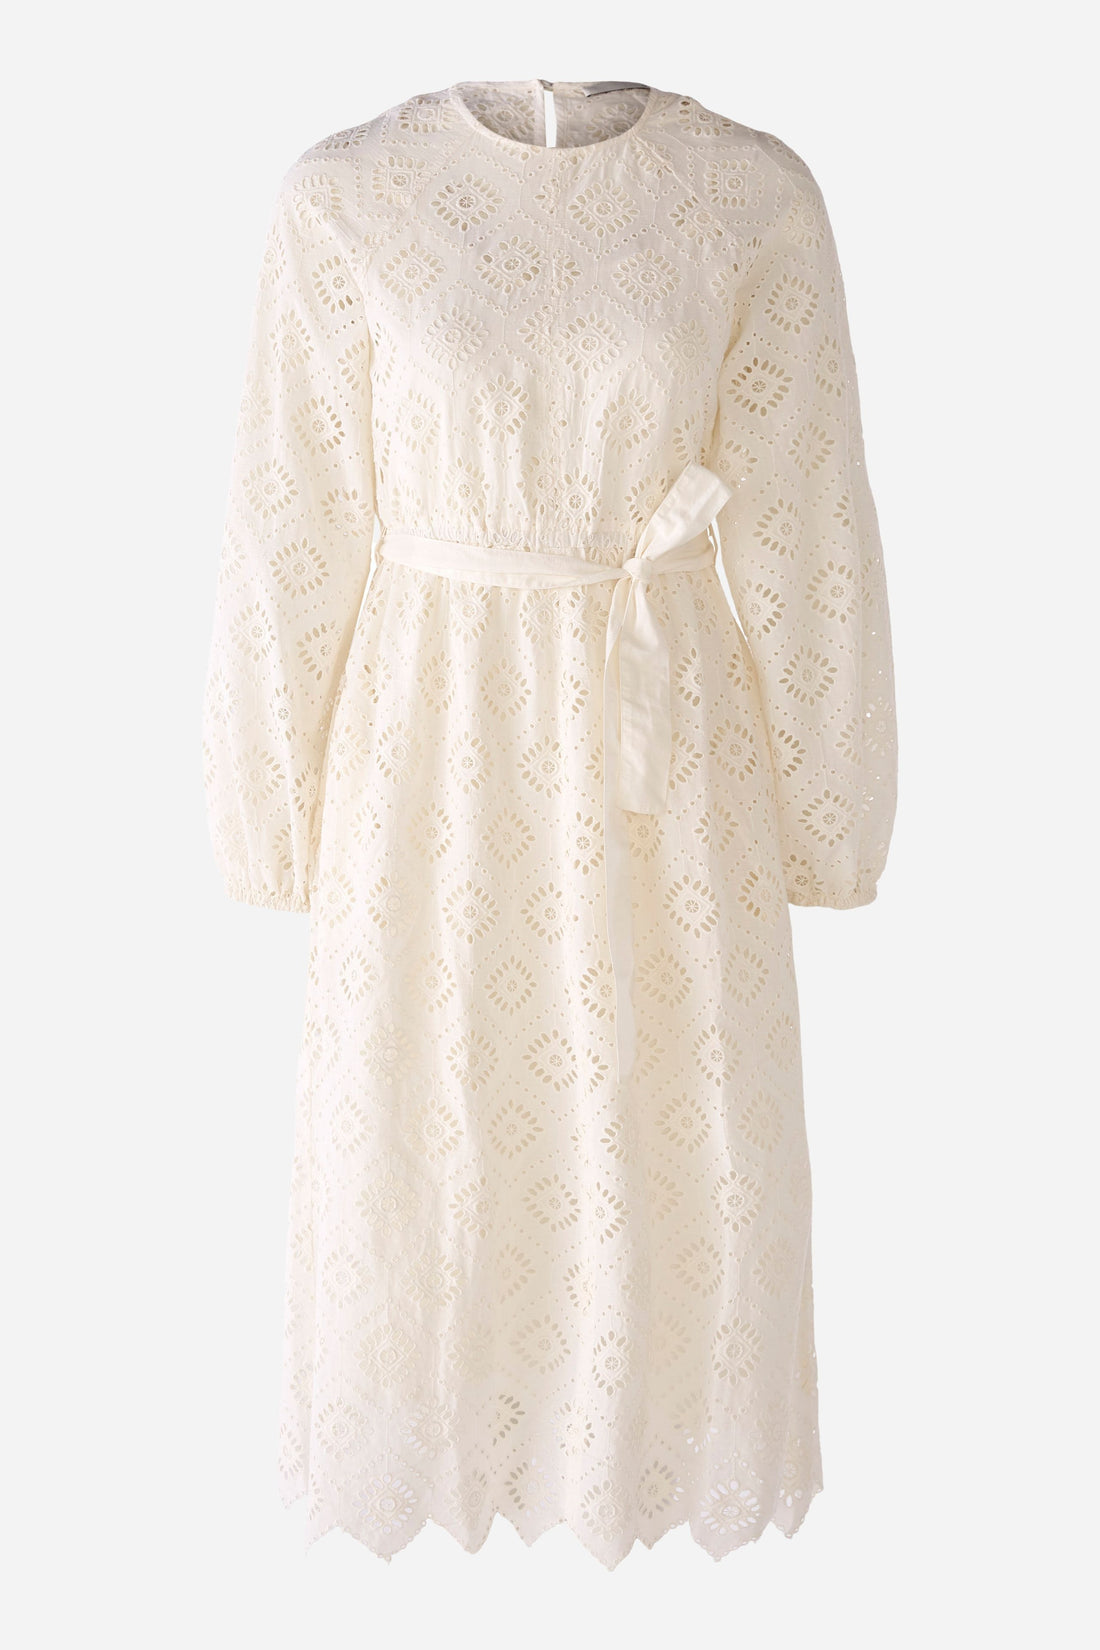 Midi Length Lace Dress Slightly Fitted In Summery Flair